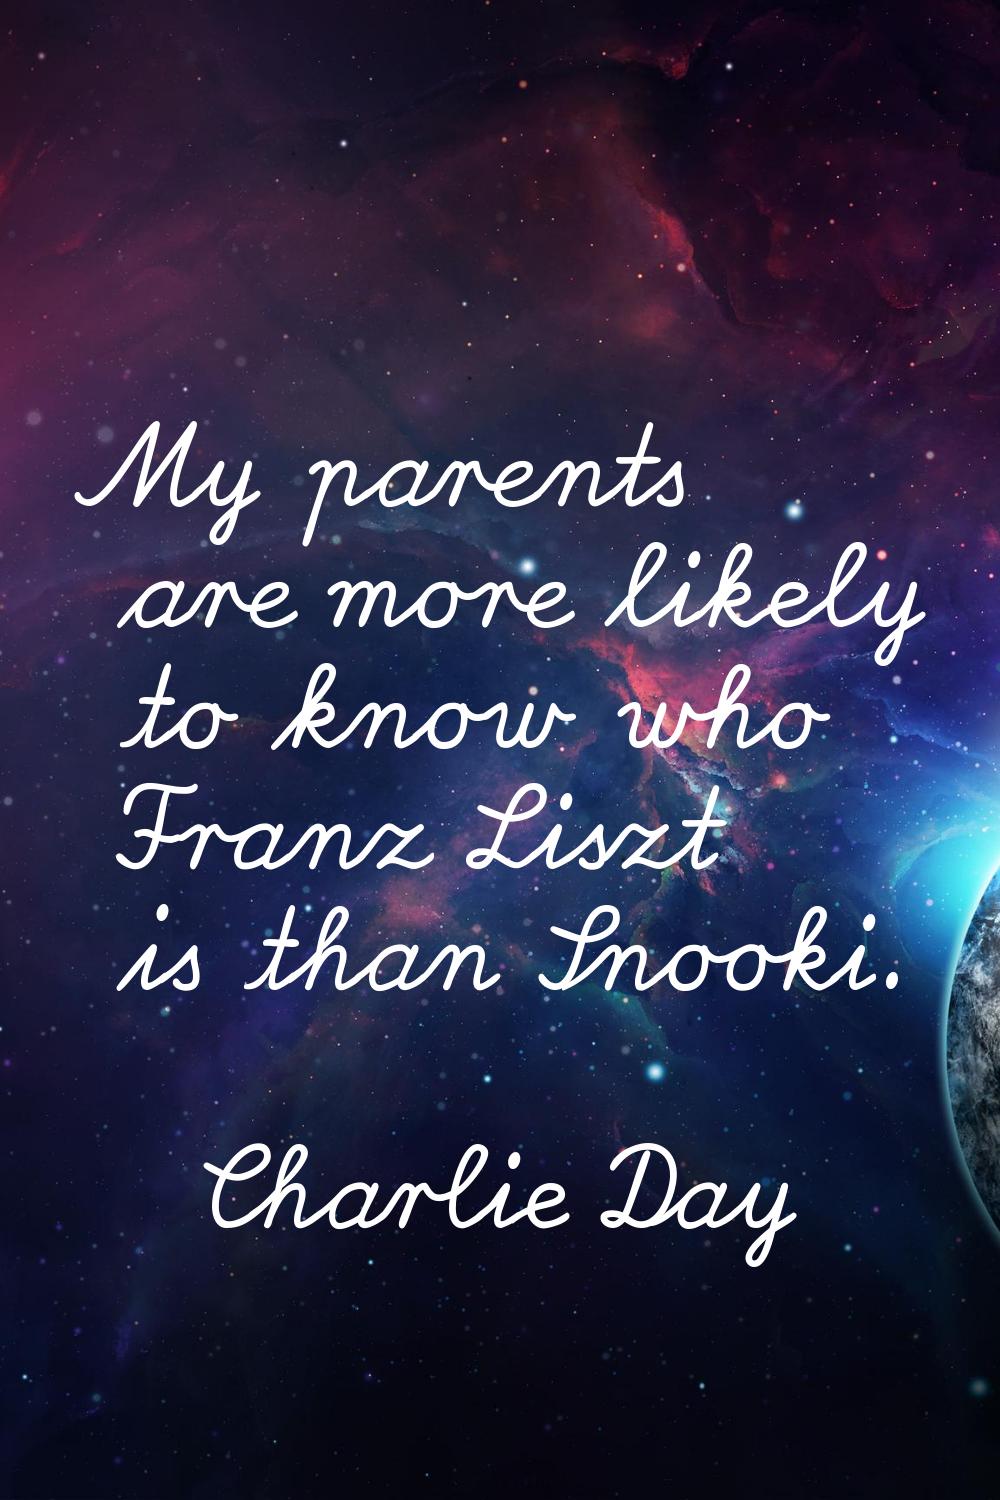 My parents are more likely to know who Franz Liszt is than Snooki.